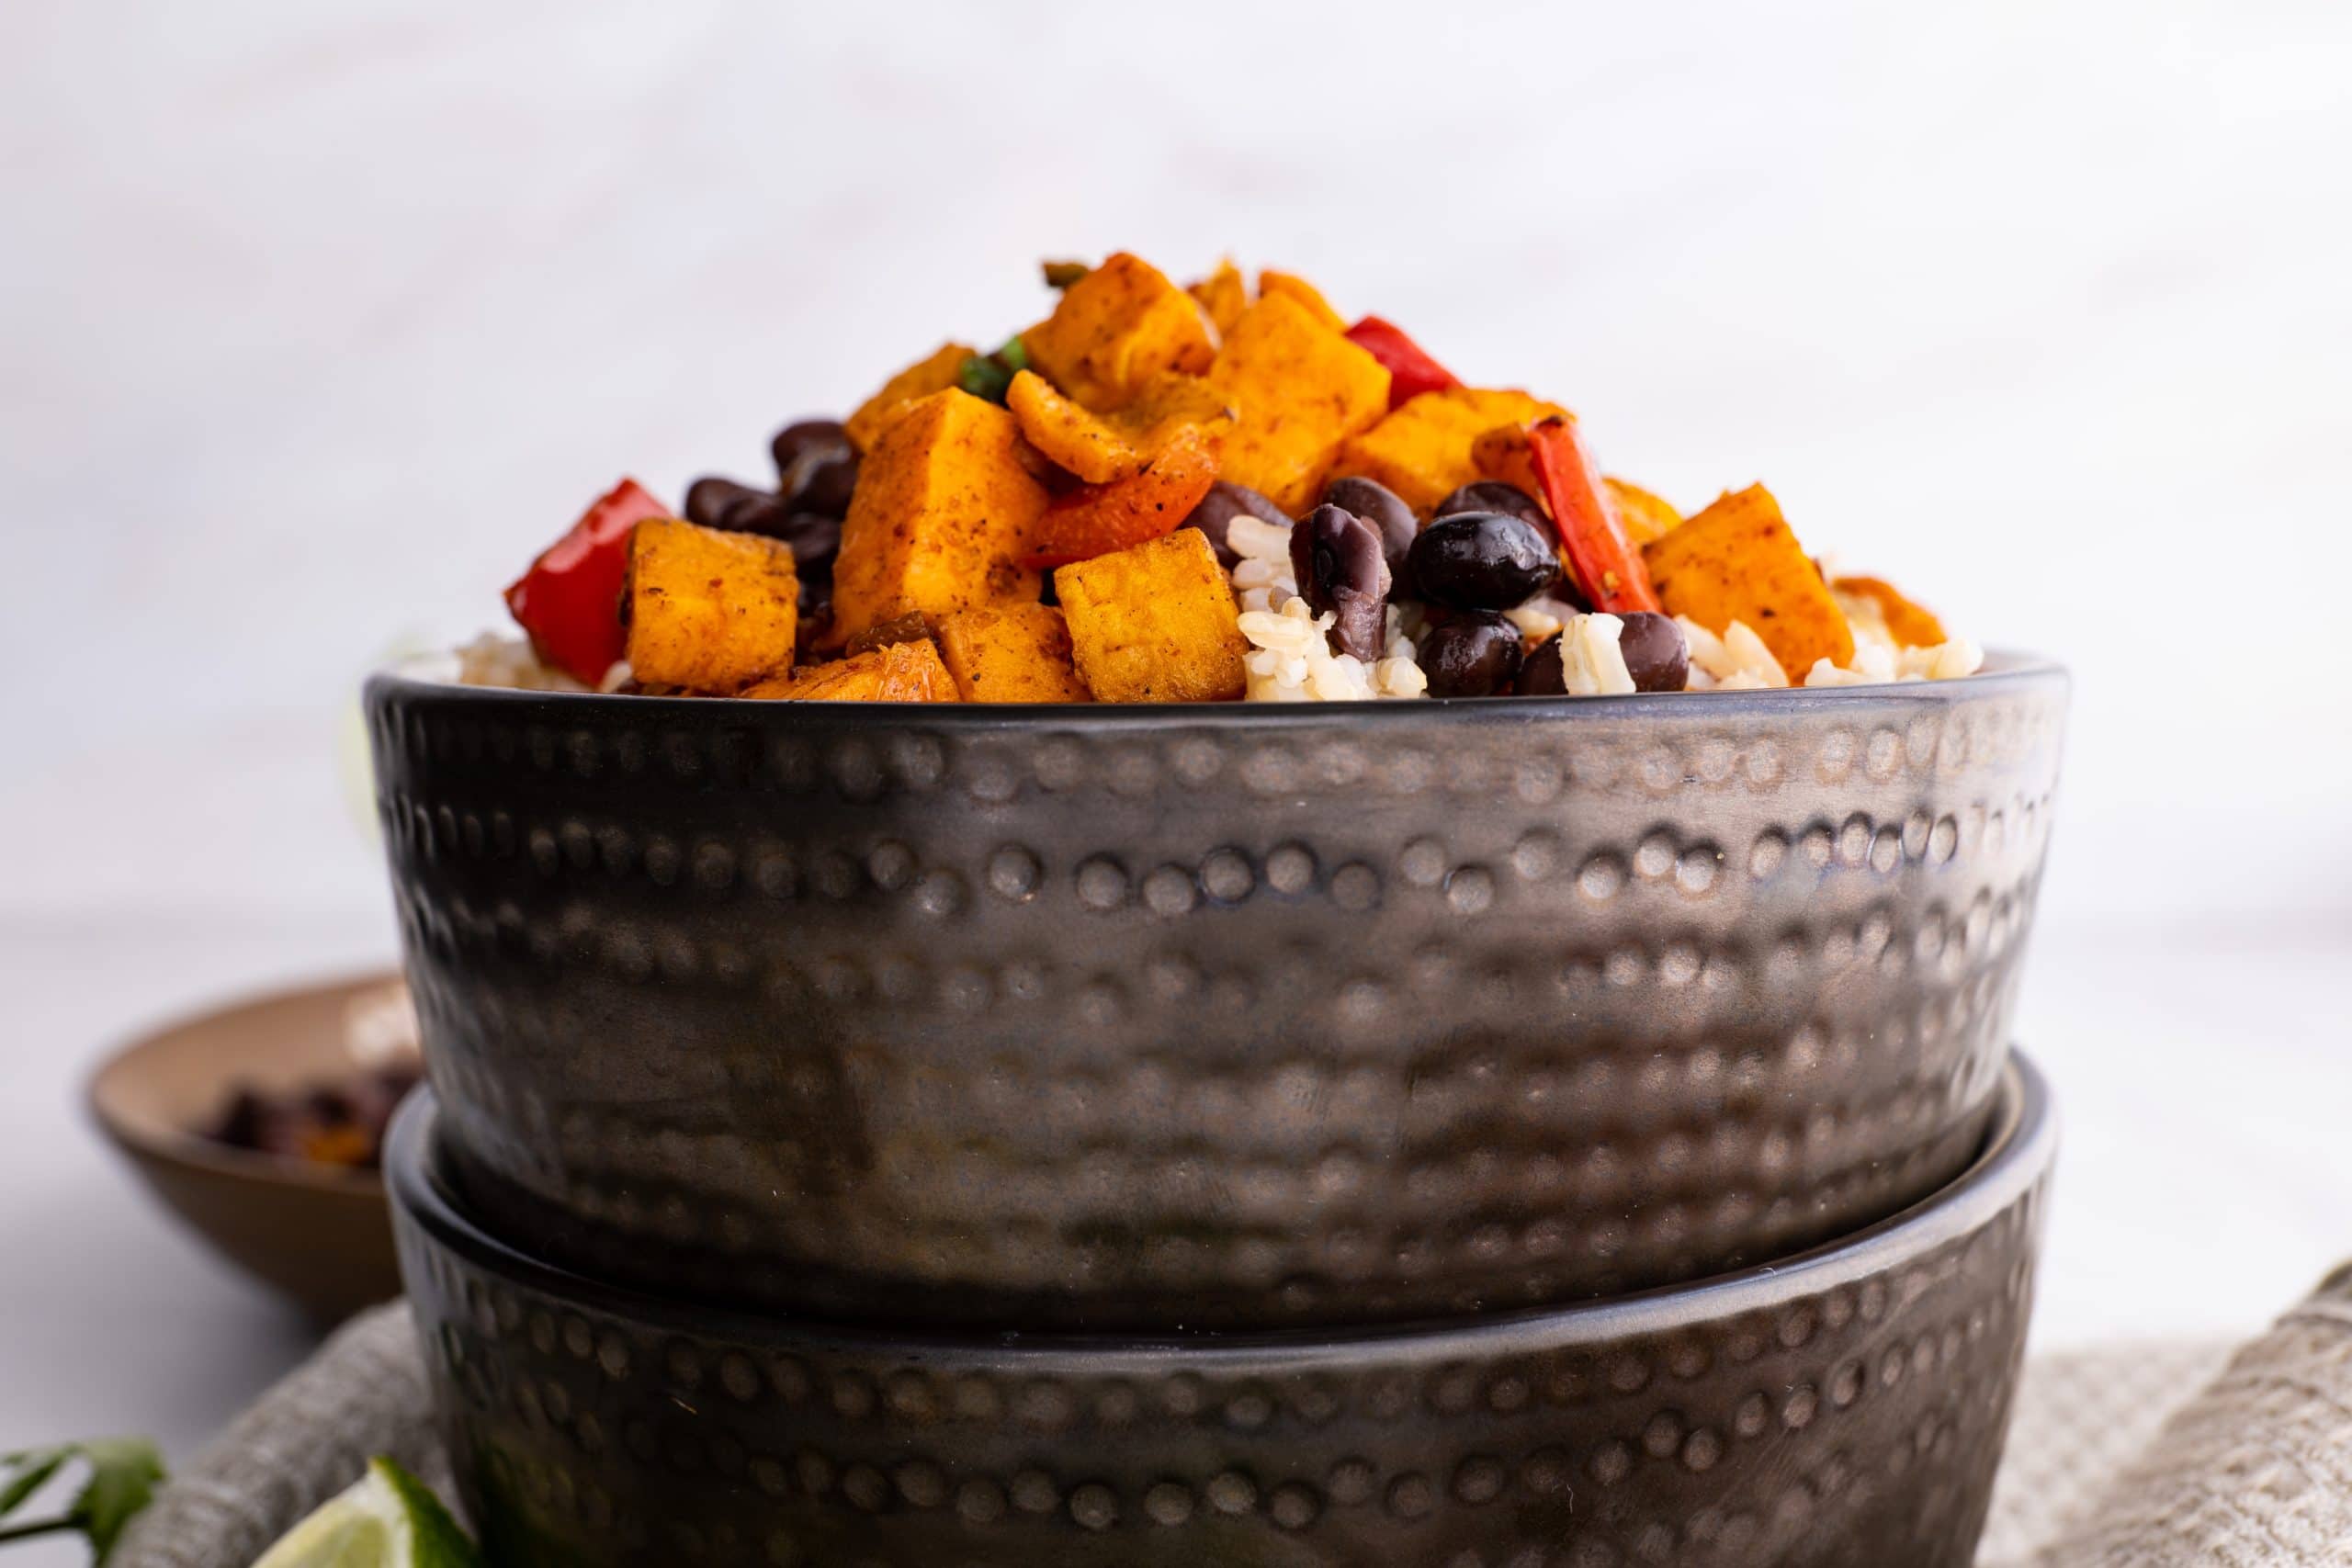 Dark textured bowl full of roasted vegetables, black beans, and rice